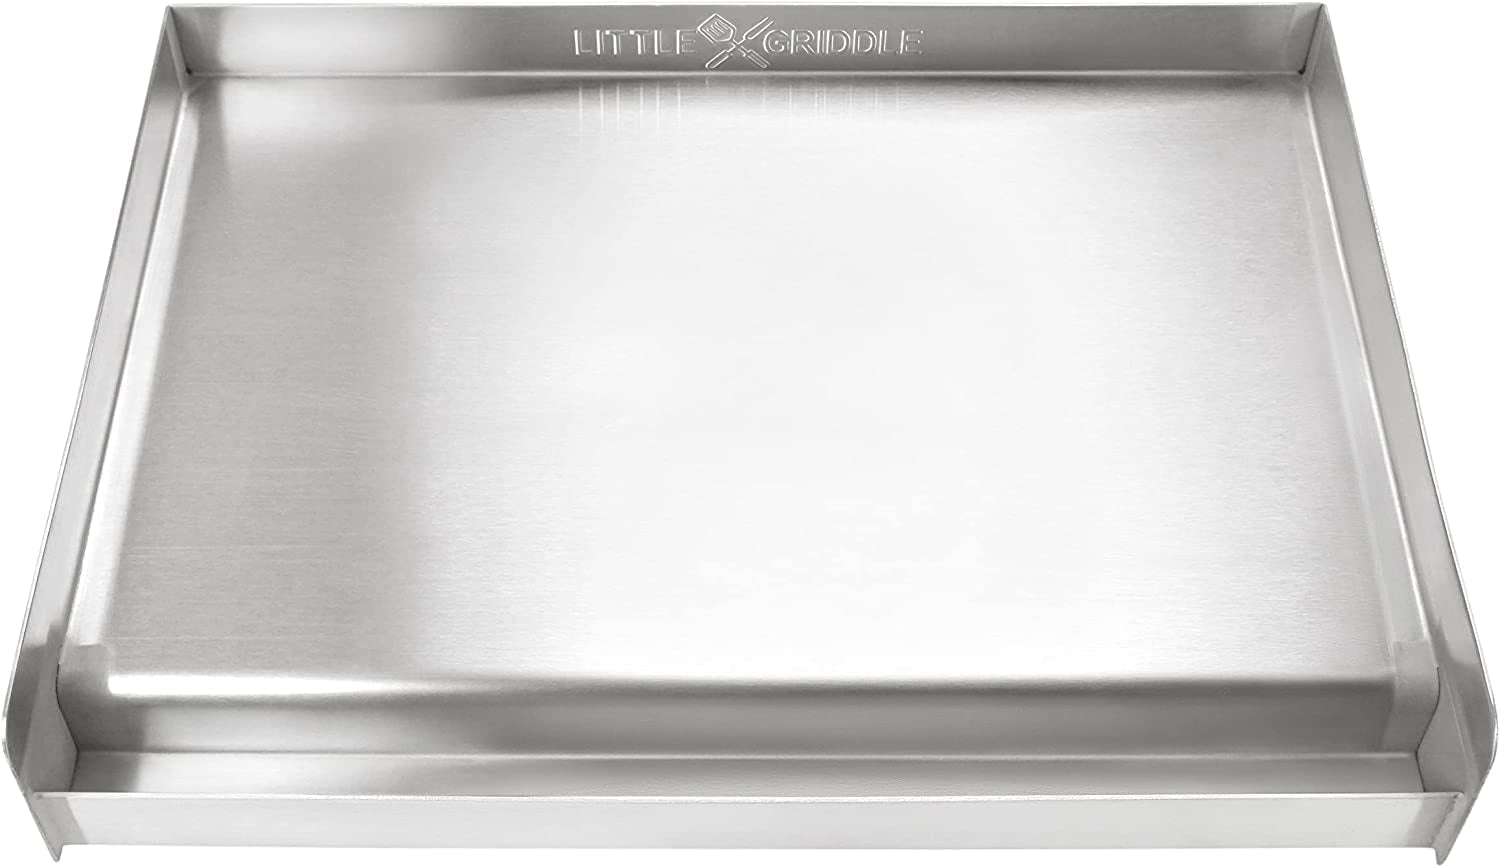 Little Griddle, LITTLE GRIDDLE Sizzle-Q SQ180 100% Stainless Steel Universal Griddle with Even Heating Cross Bracing for Charcoal/Gas Grills, Camping, Tailgating, and Parties (18"X13"X3")